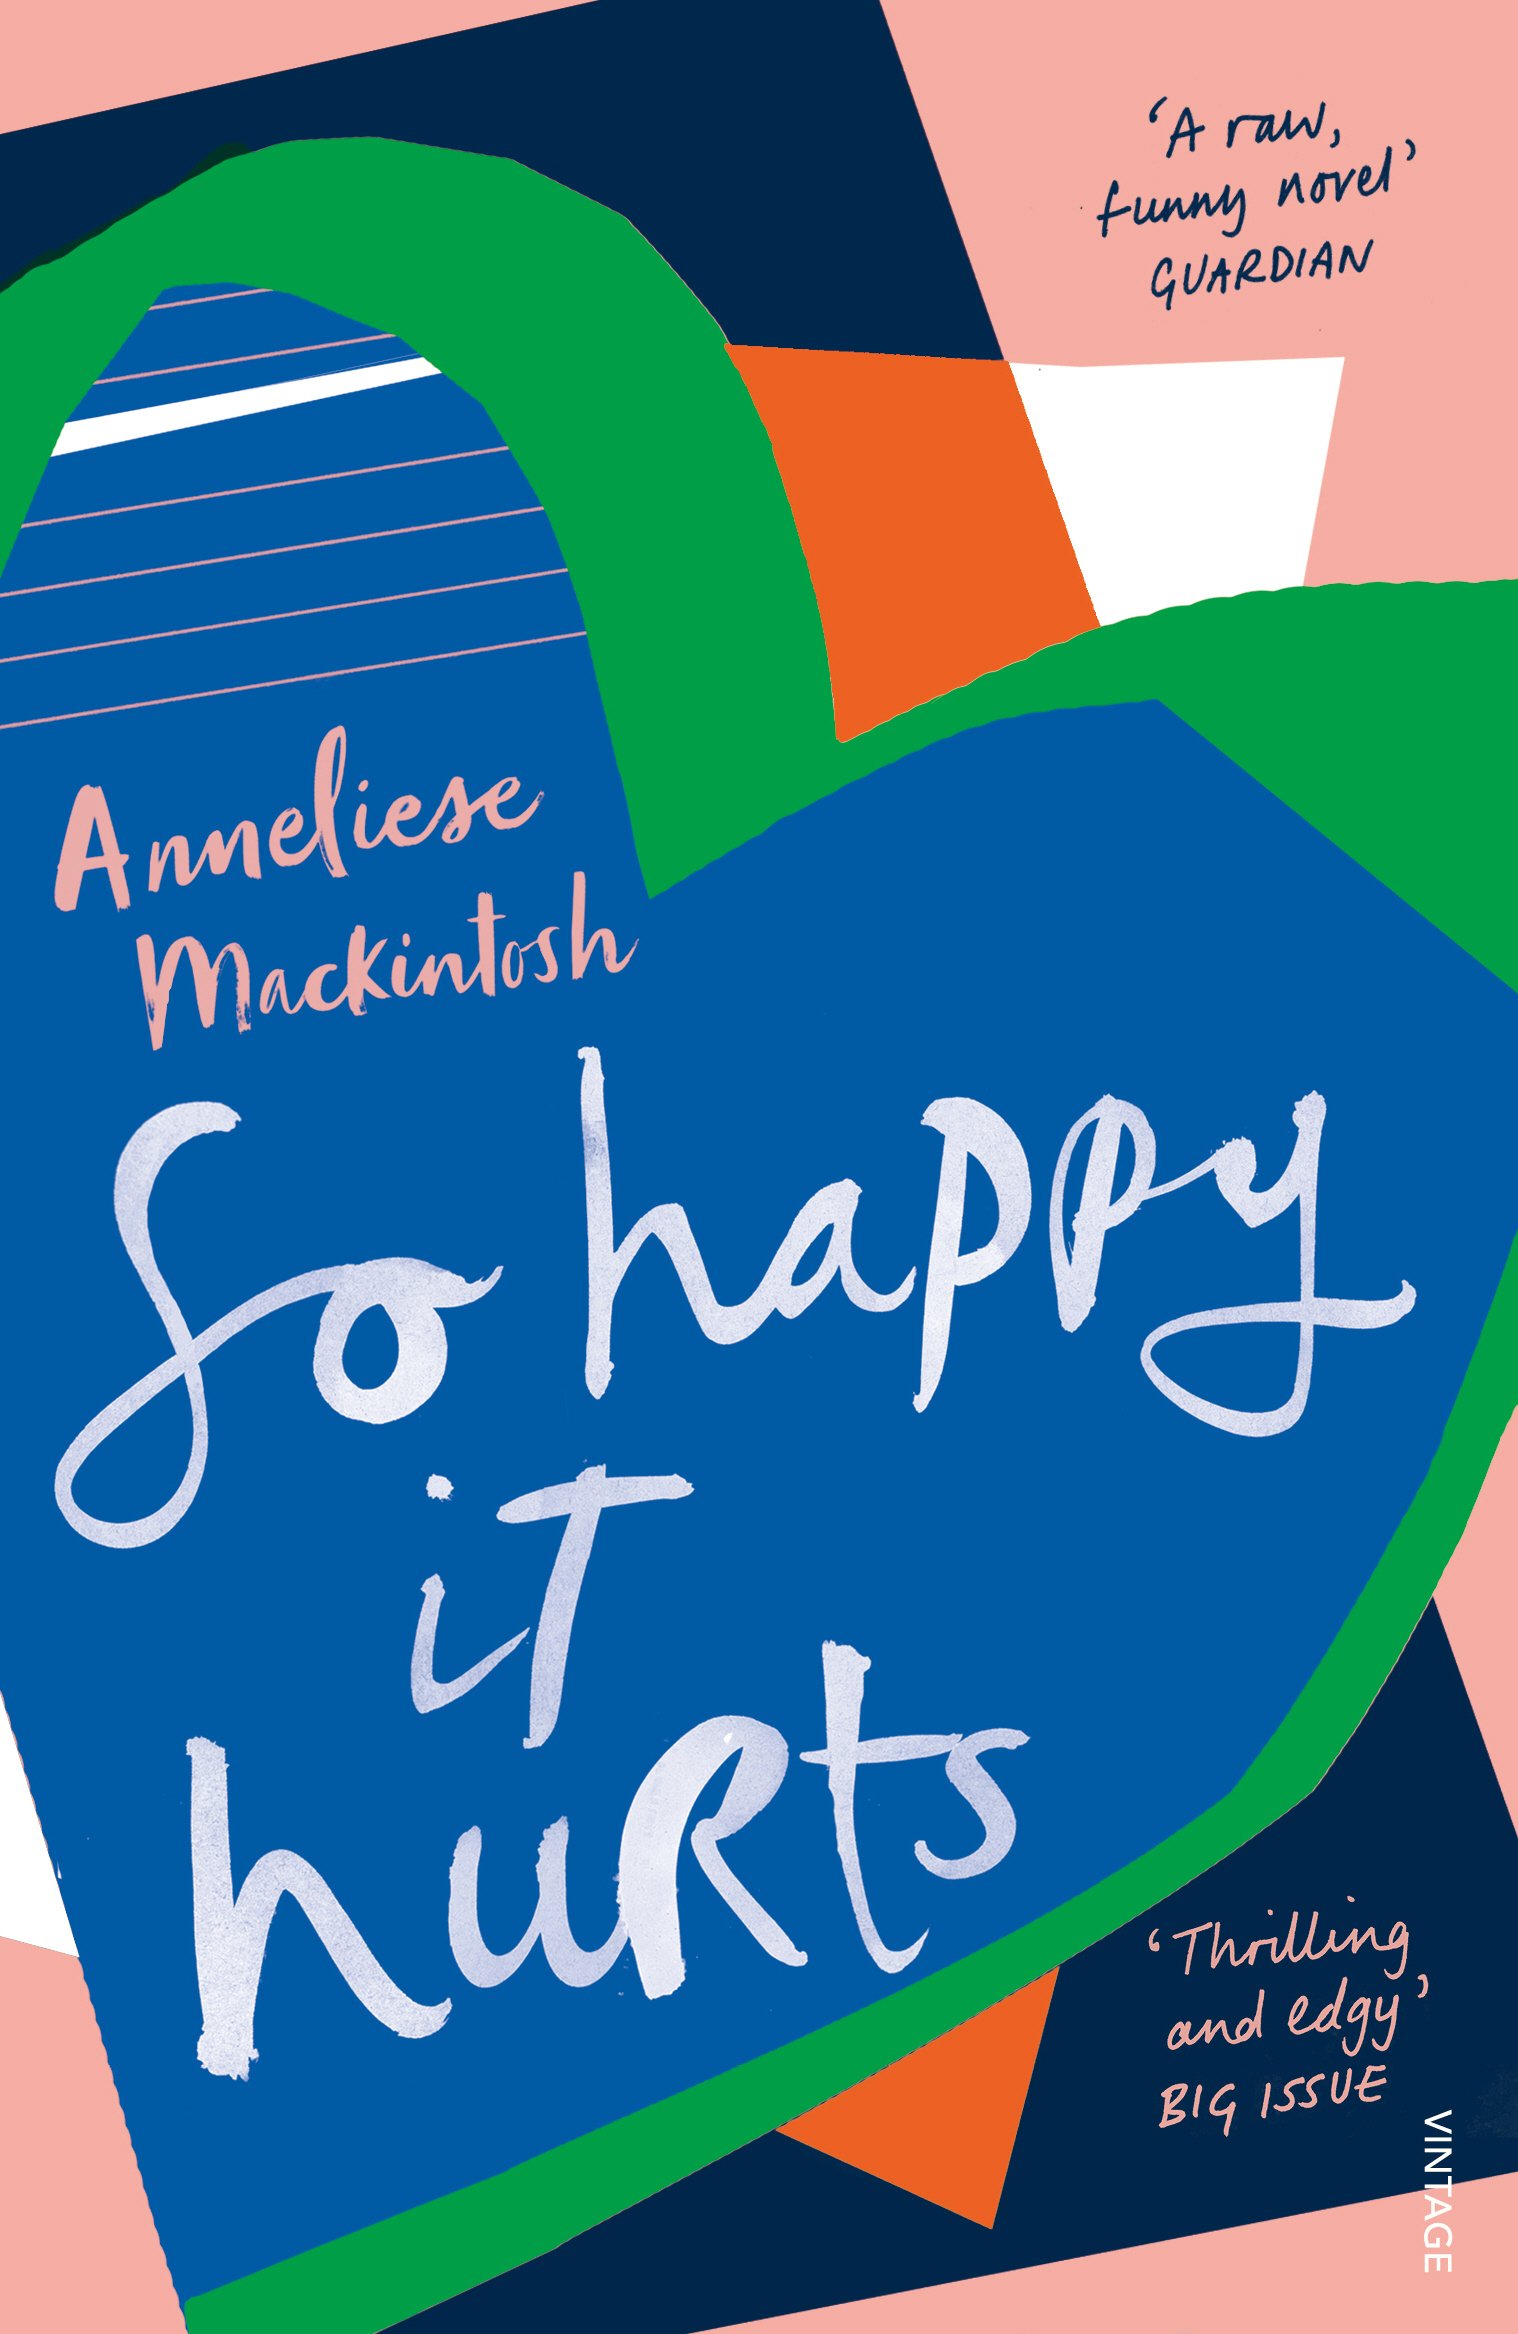 So Happy It Hurts | Anneliese Mackintosh image2